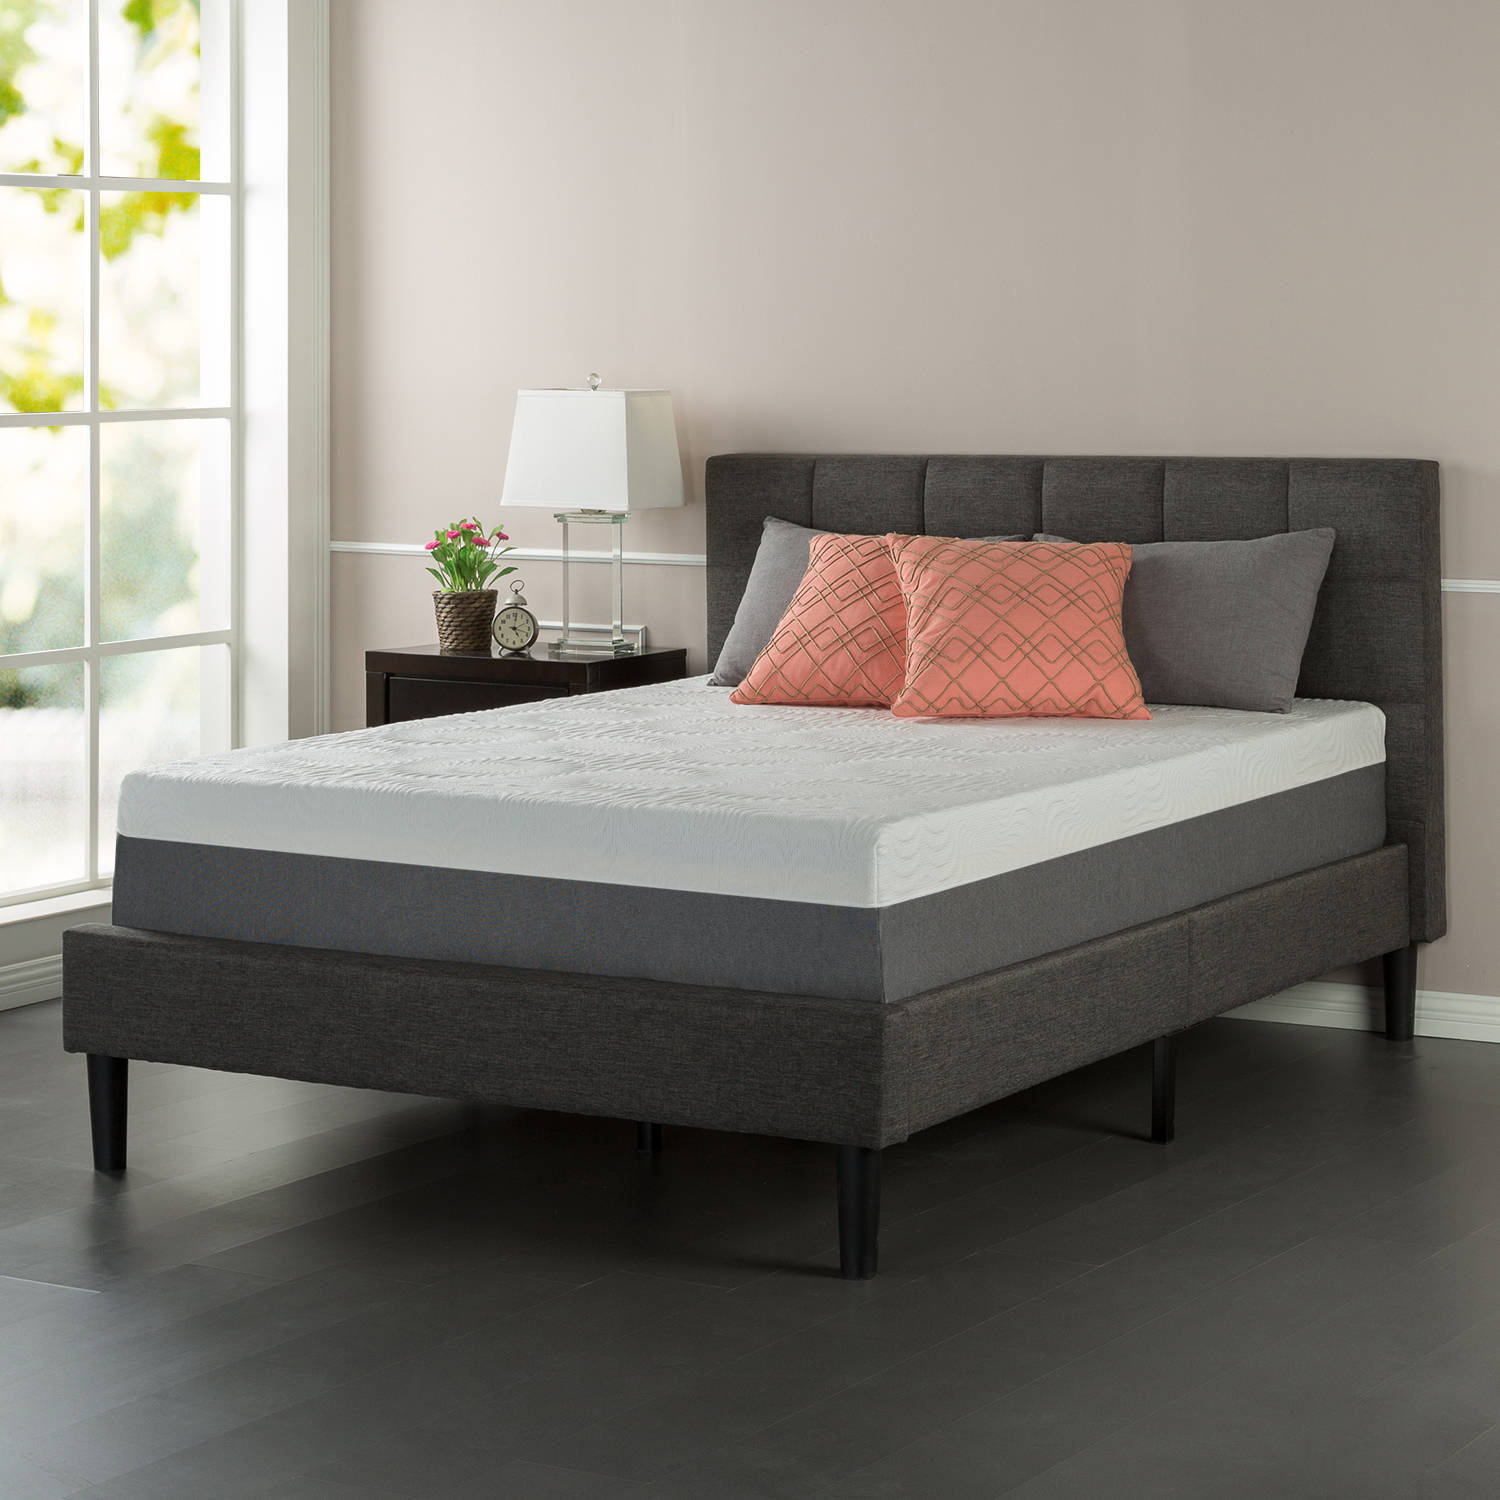 Better Homes and Gardens queen 12″ gel infused memory foam mattress for $159